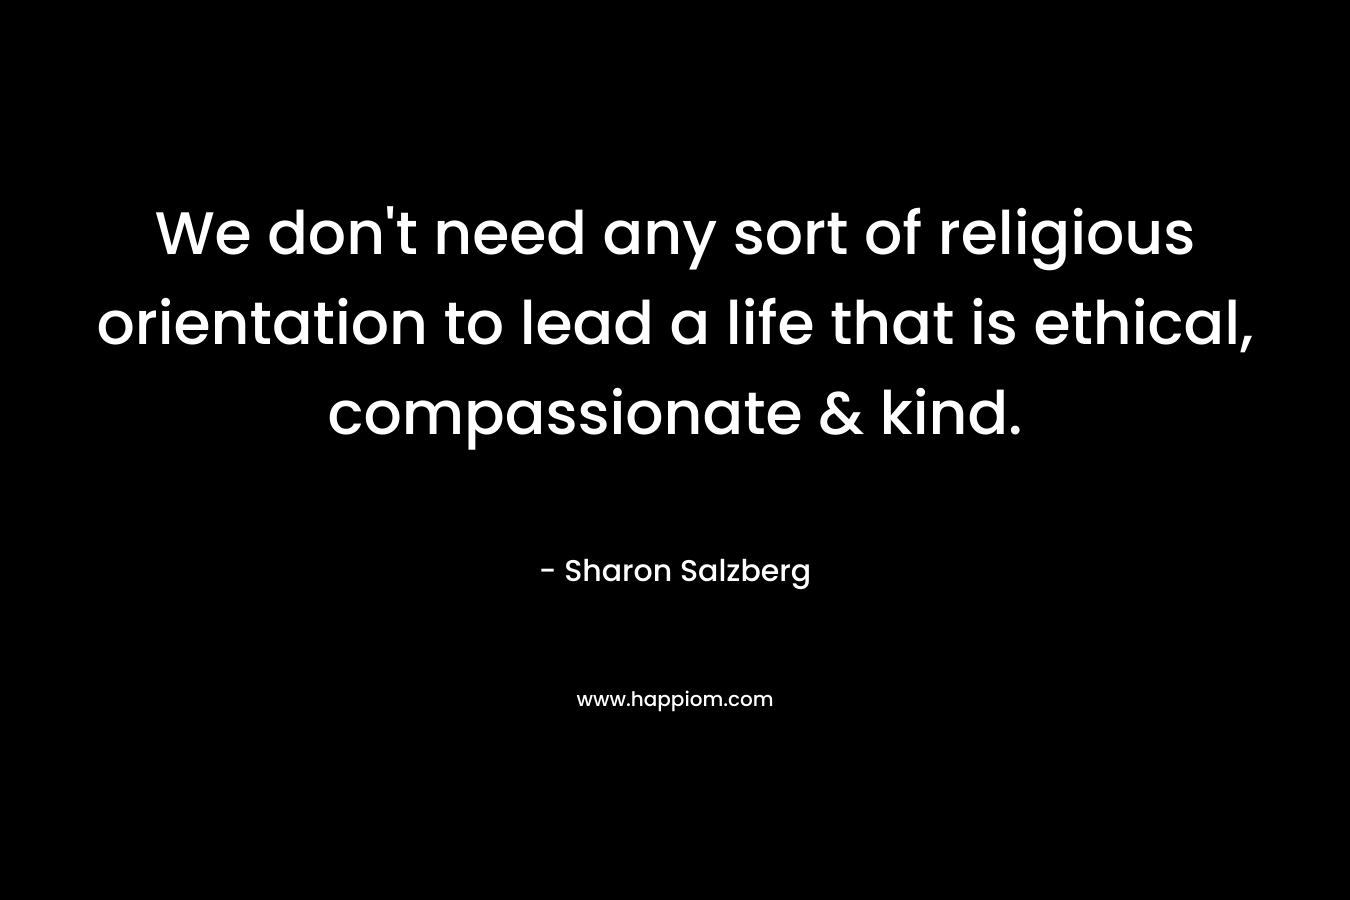 We don't need any sort of religious orientation to lead a life that is ethical, compassionate & kind.